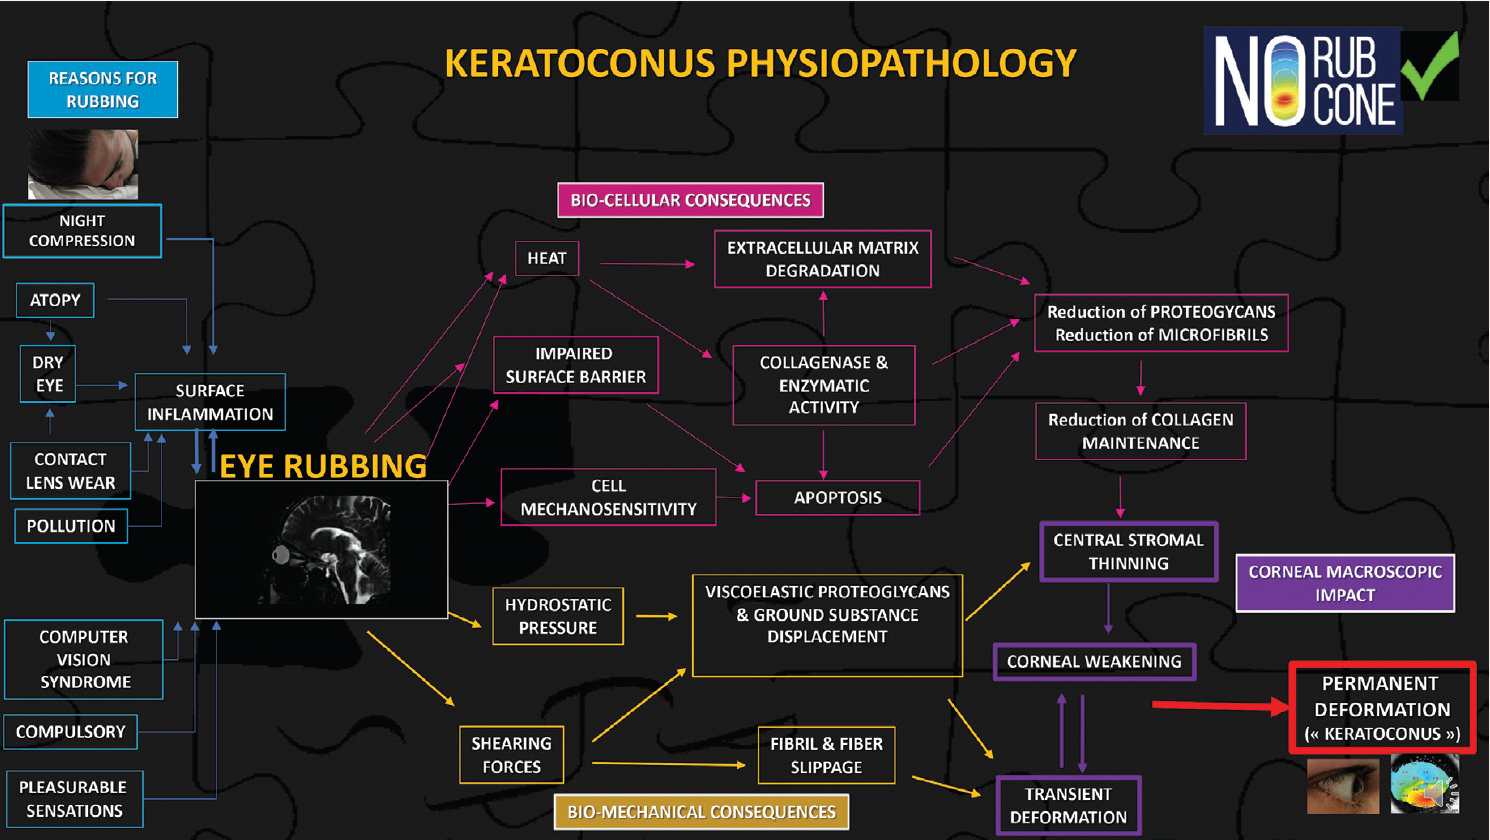 Figure 5. Proposed route for keratoconus physiopathology. (All images courtesy of Prof. Damien Gatinel)